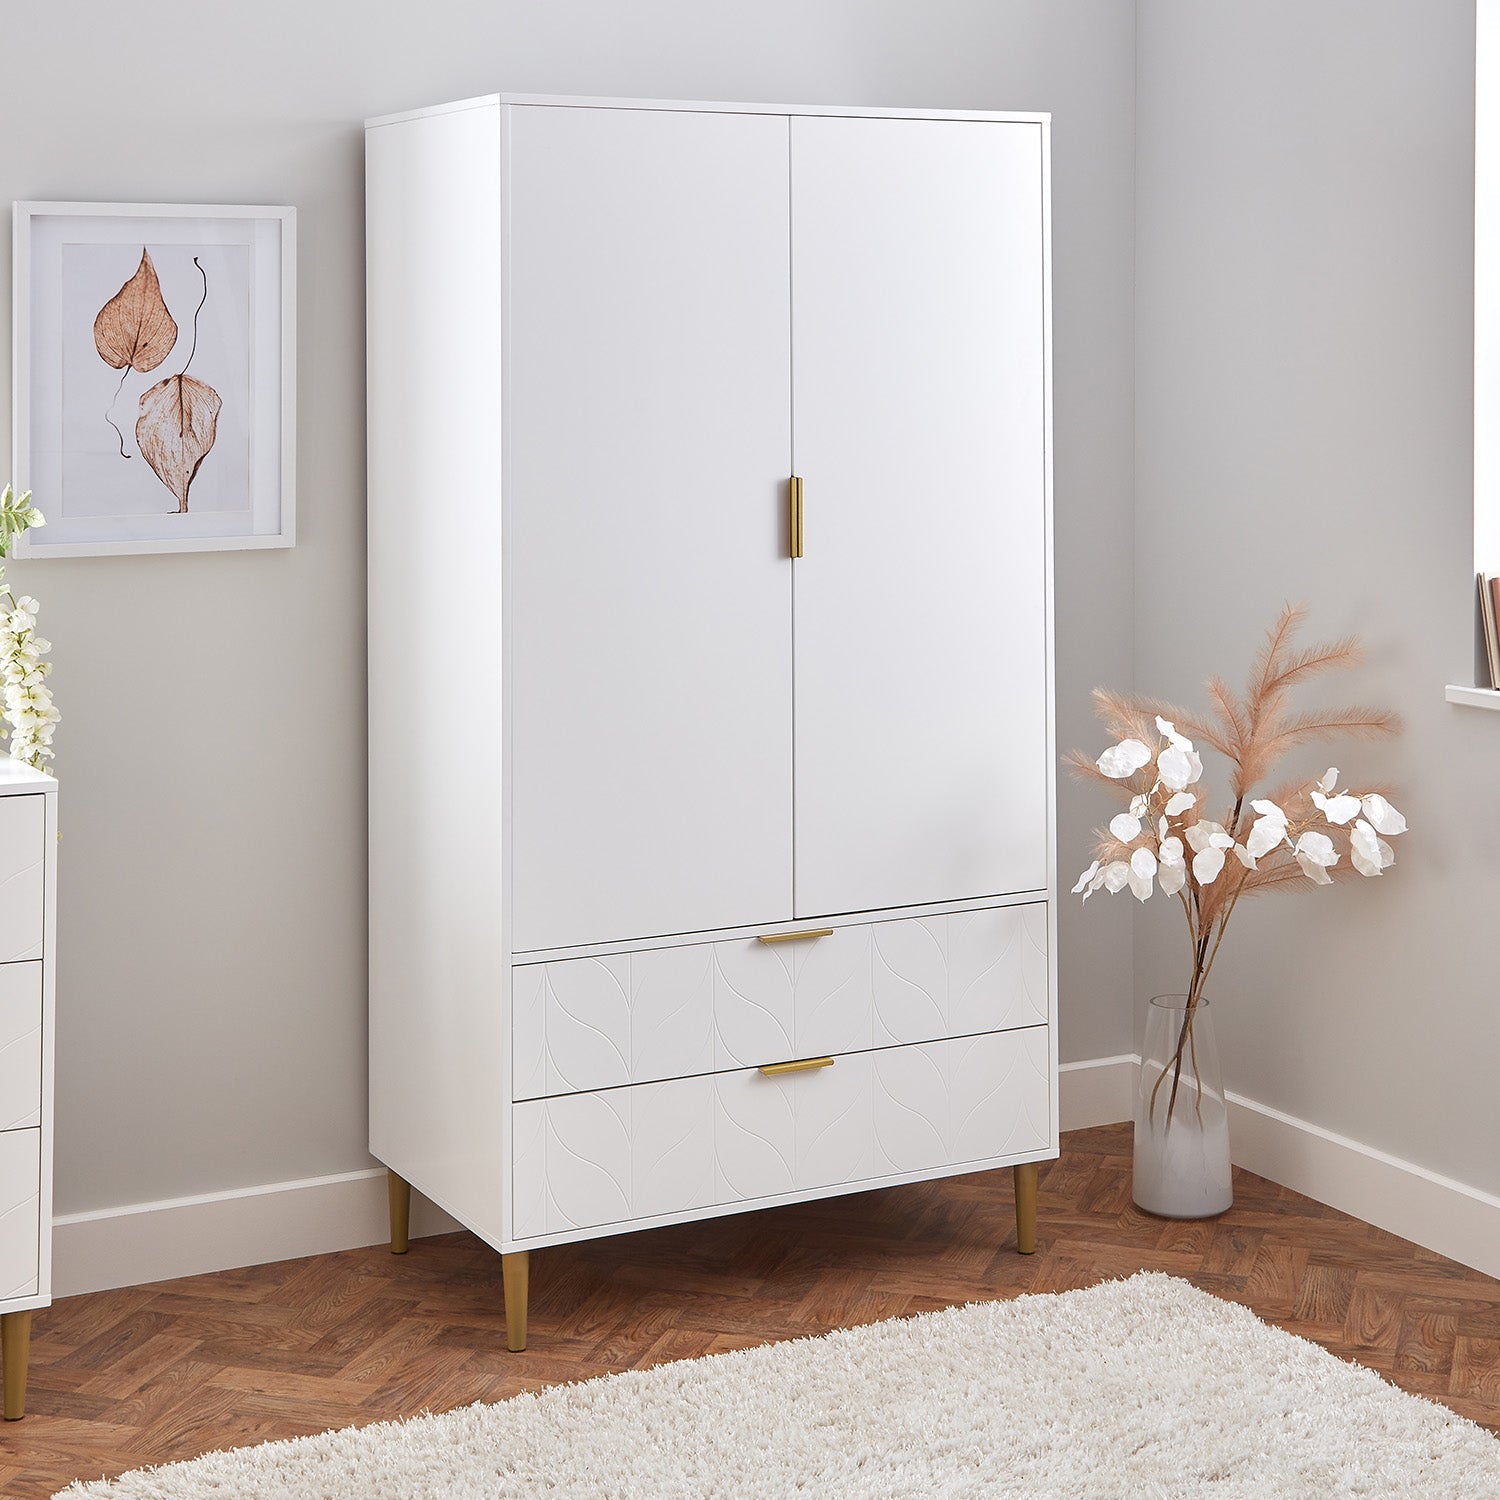 Gloria 4 piece bedroom furniture set - 4 over 4 chest of drawers -white - Laura James